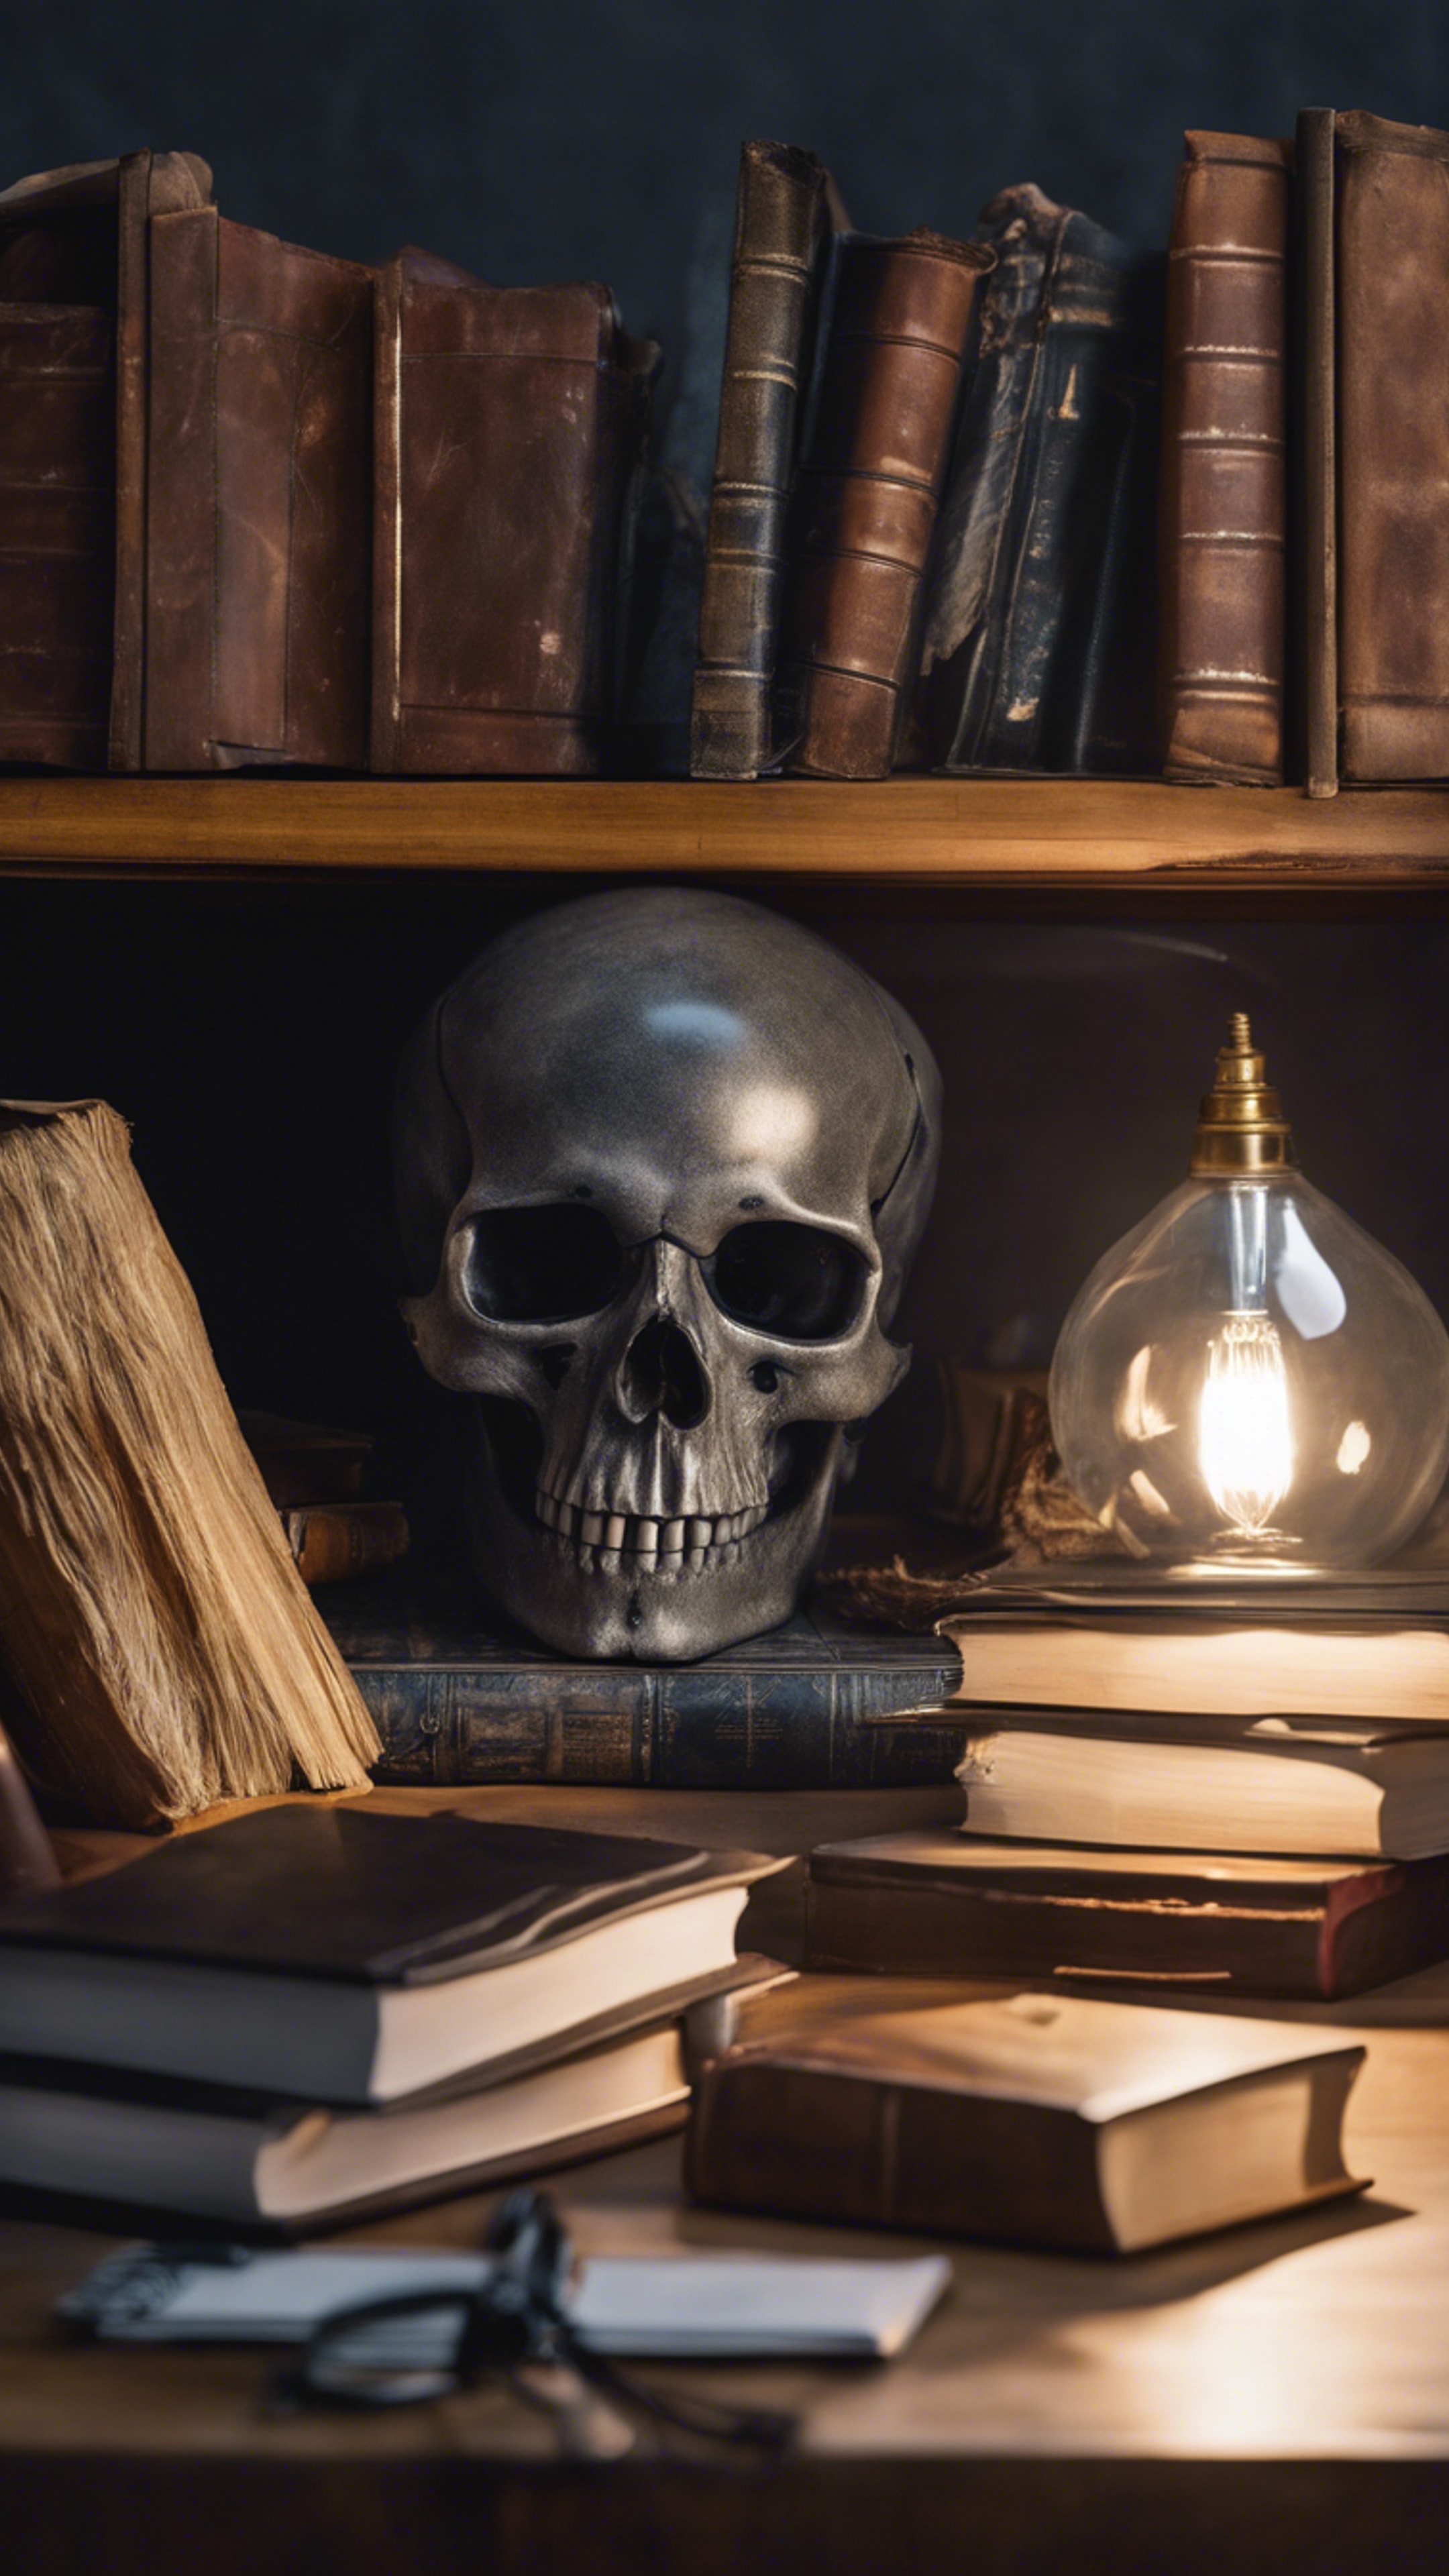 A study desk with a gray skull paperweight, surrounded by scattered books and a dimly lit lamp. 墙纸[9ada7a5adc764debb4f2]